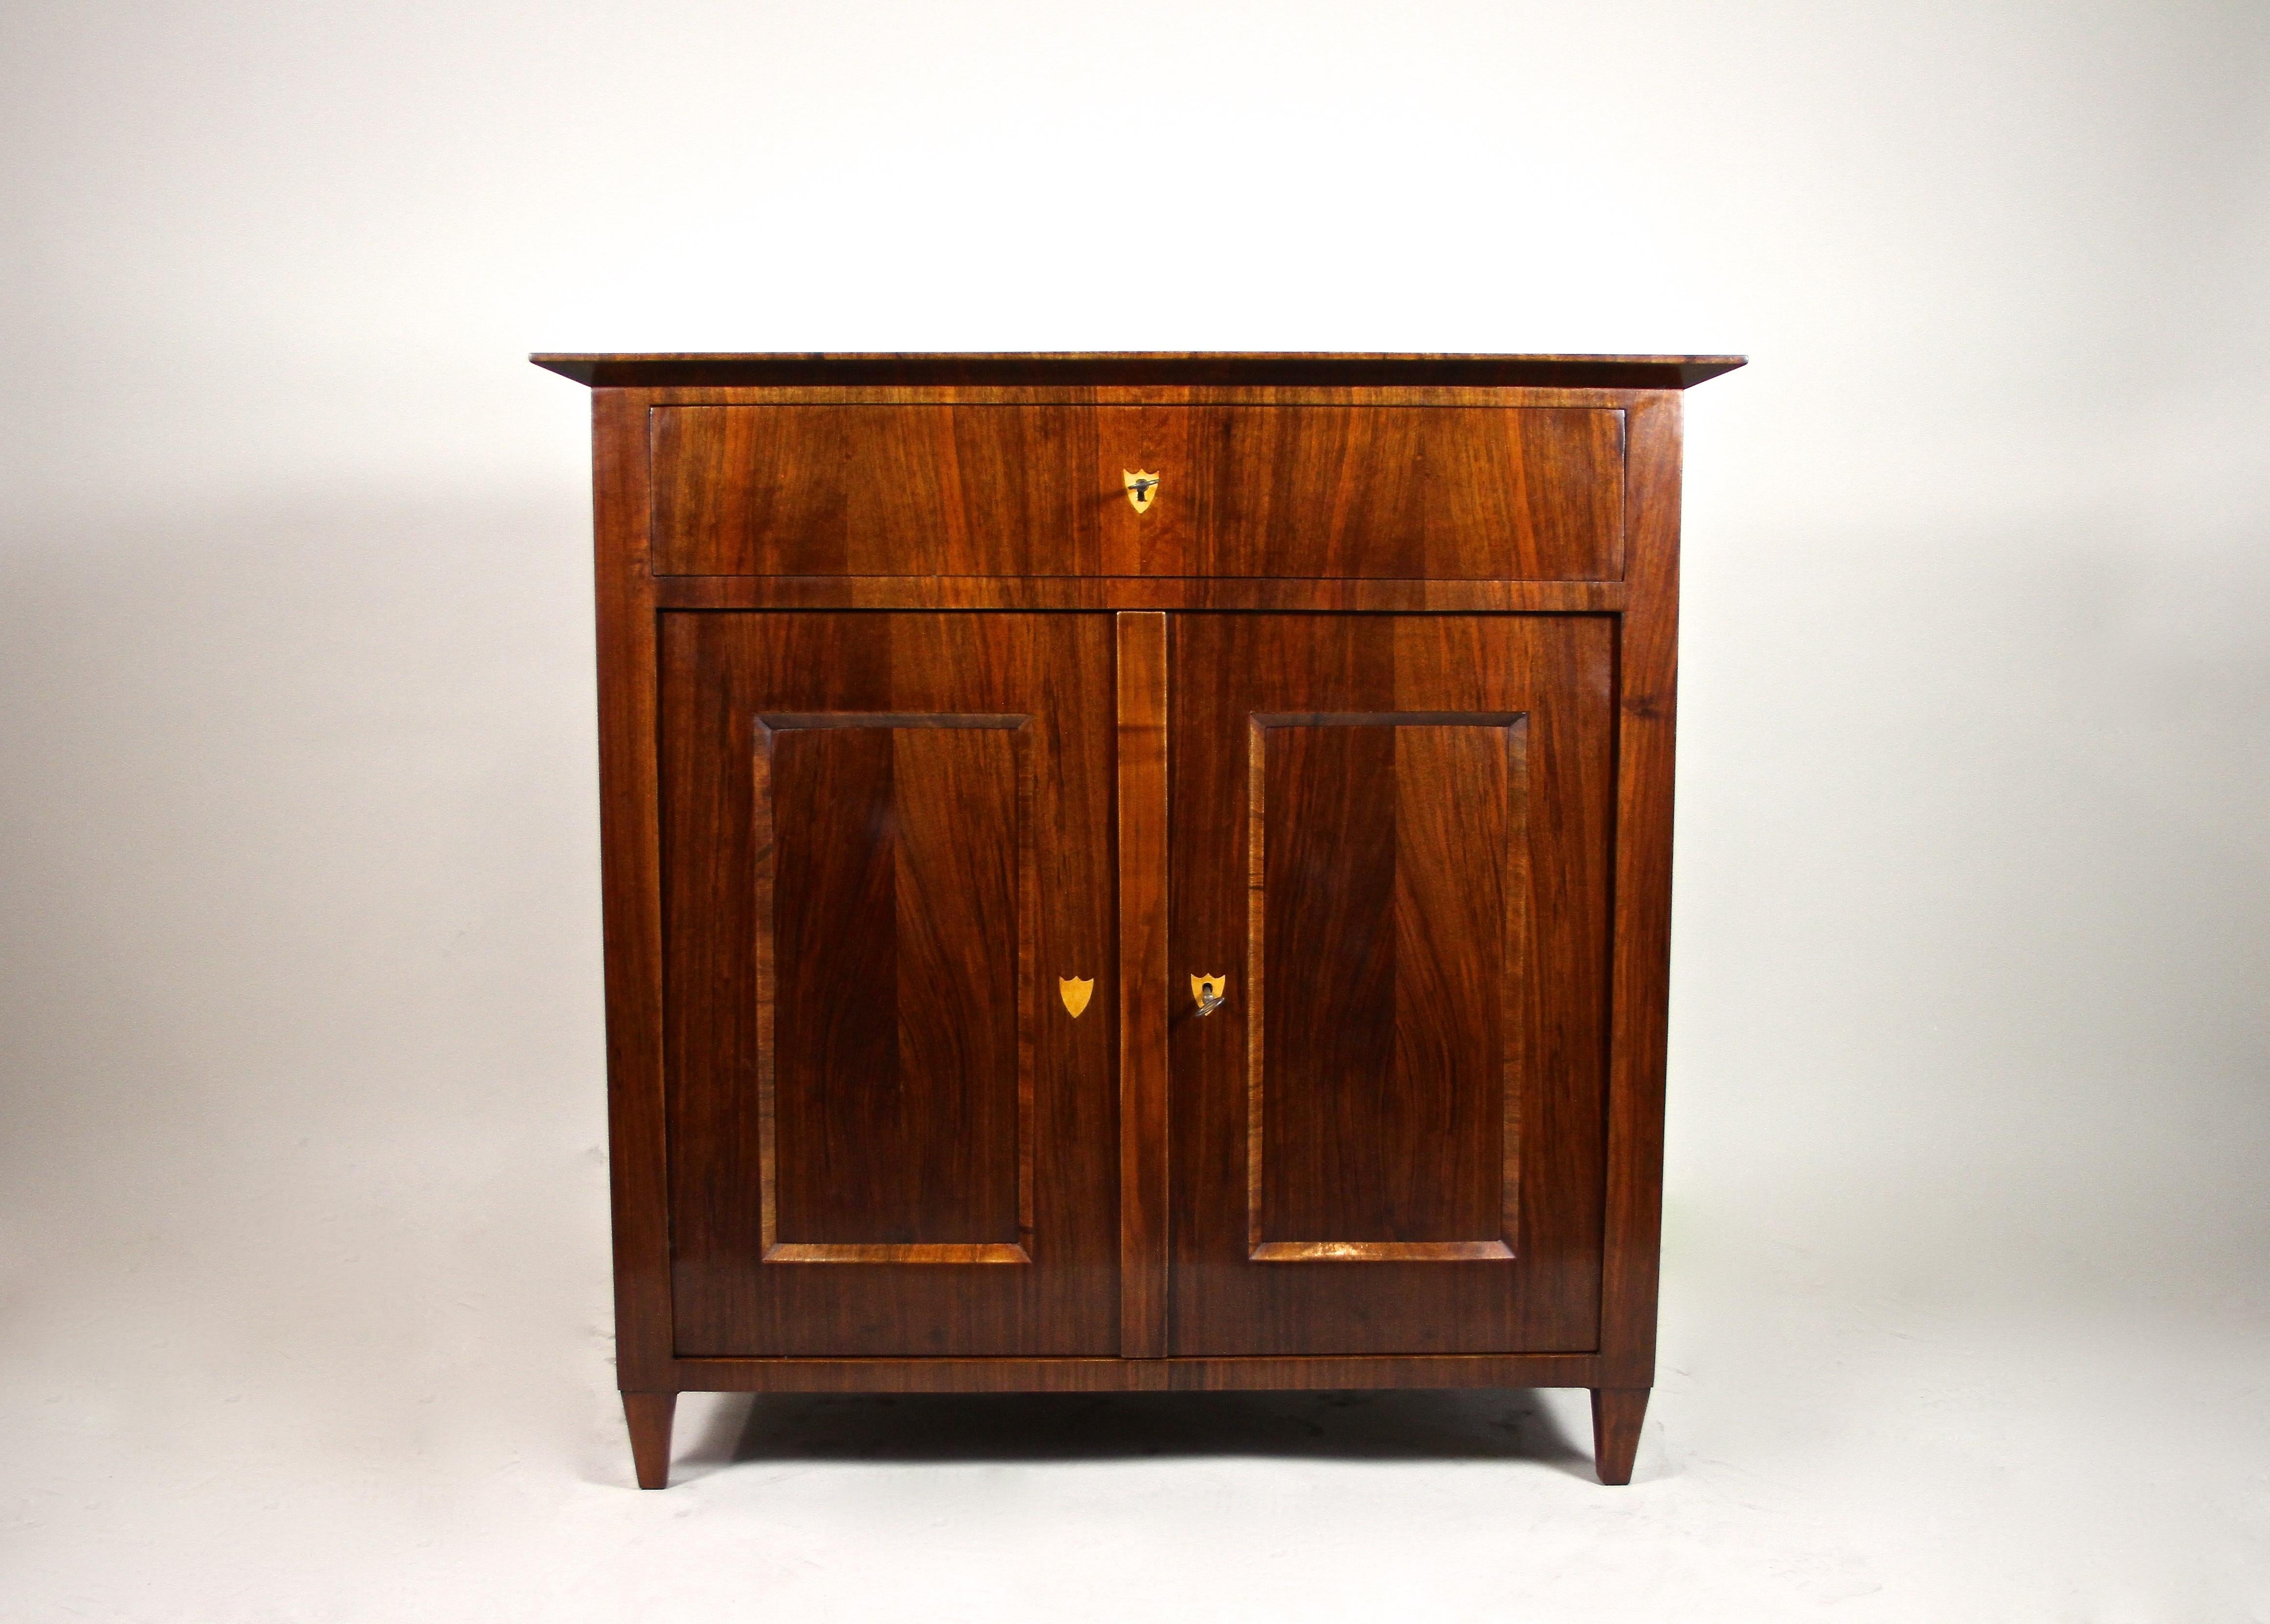 Fantastic Biedermeier nutwood trumeau commode from the second period in Austria around 1860. This compact Biedermeier commode shows a fine nutwood veneer work with beautiful grain, radiantly hand-polished with ruby shellac. This outstanding Trumeau